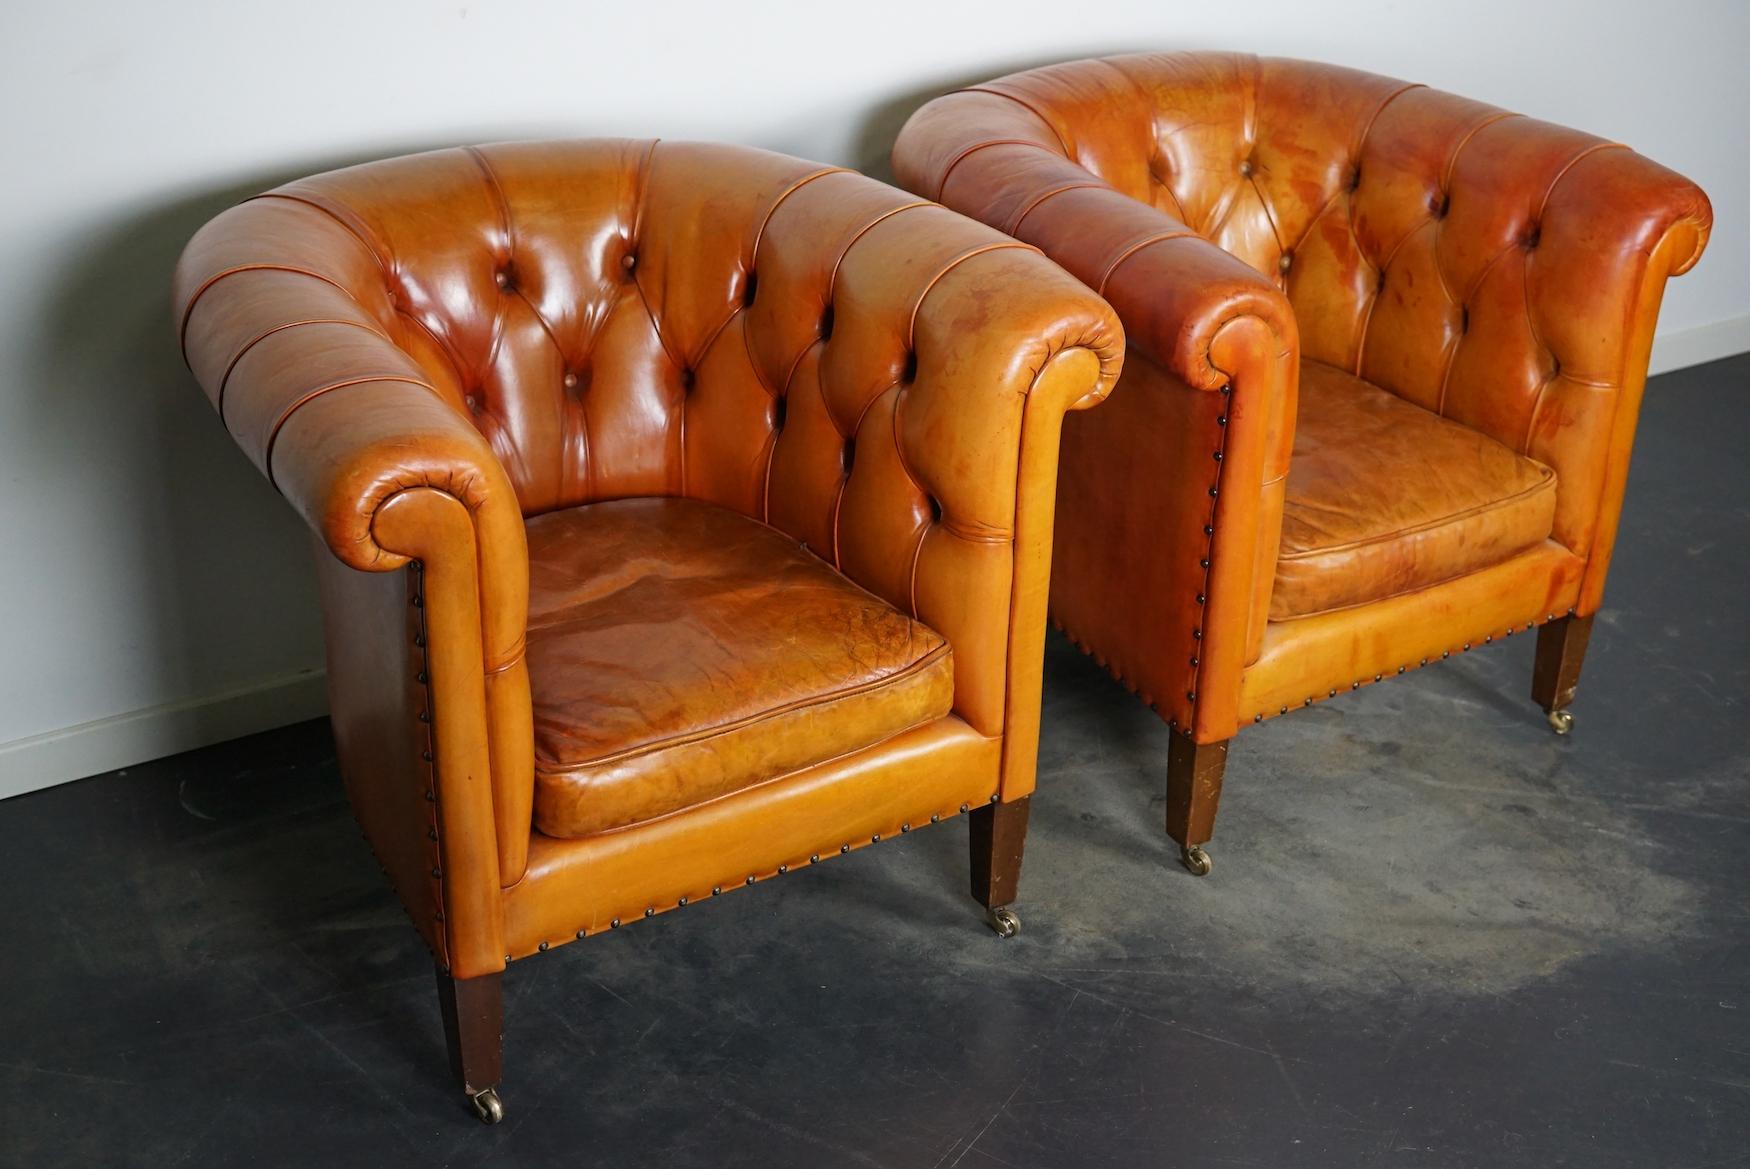 Vintage Dutch Chesterfield Cognac Leather Club Chairs, Set of 2 2